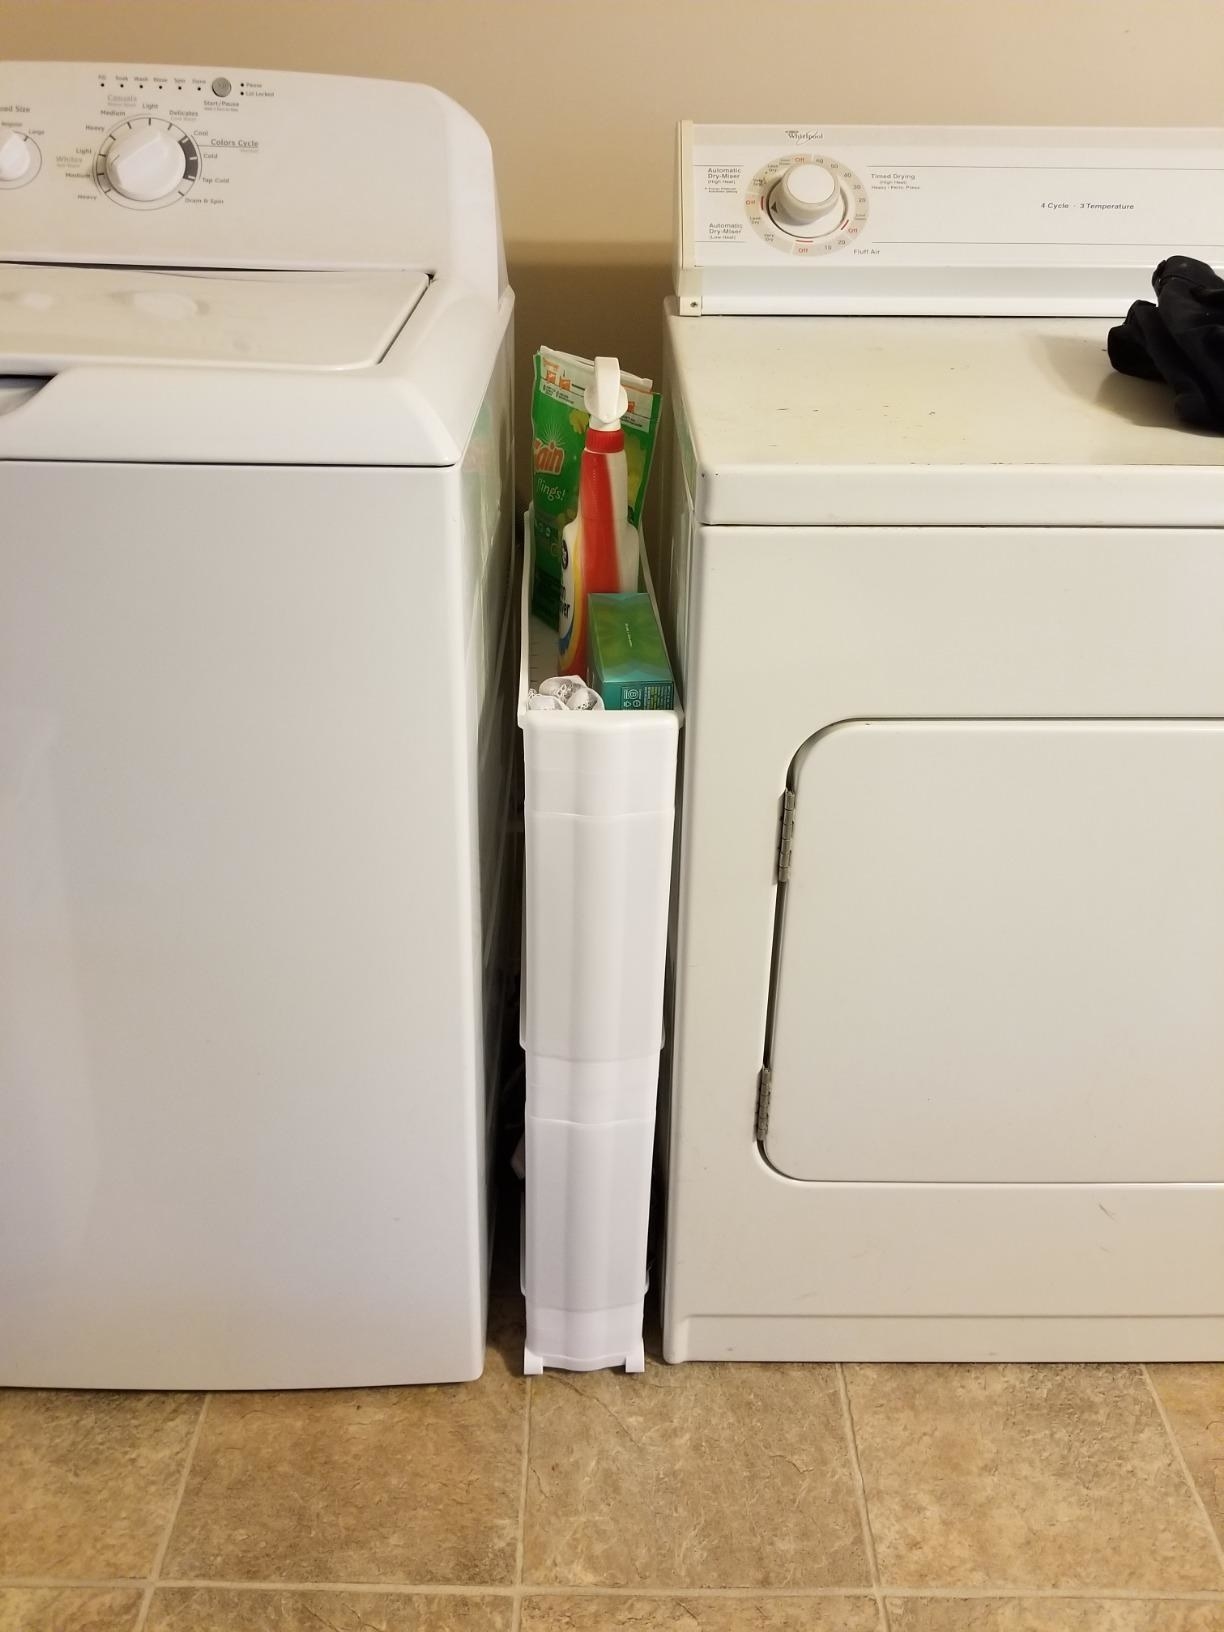 a review photo of the cart between a washer and dryer